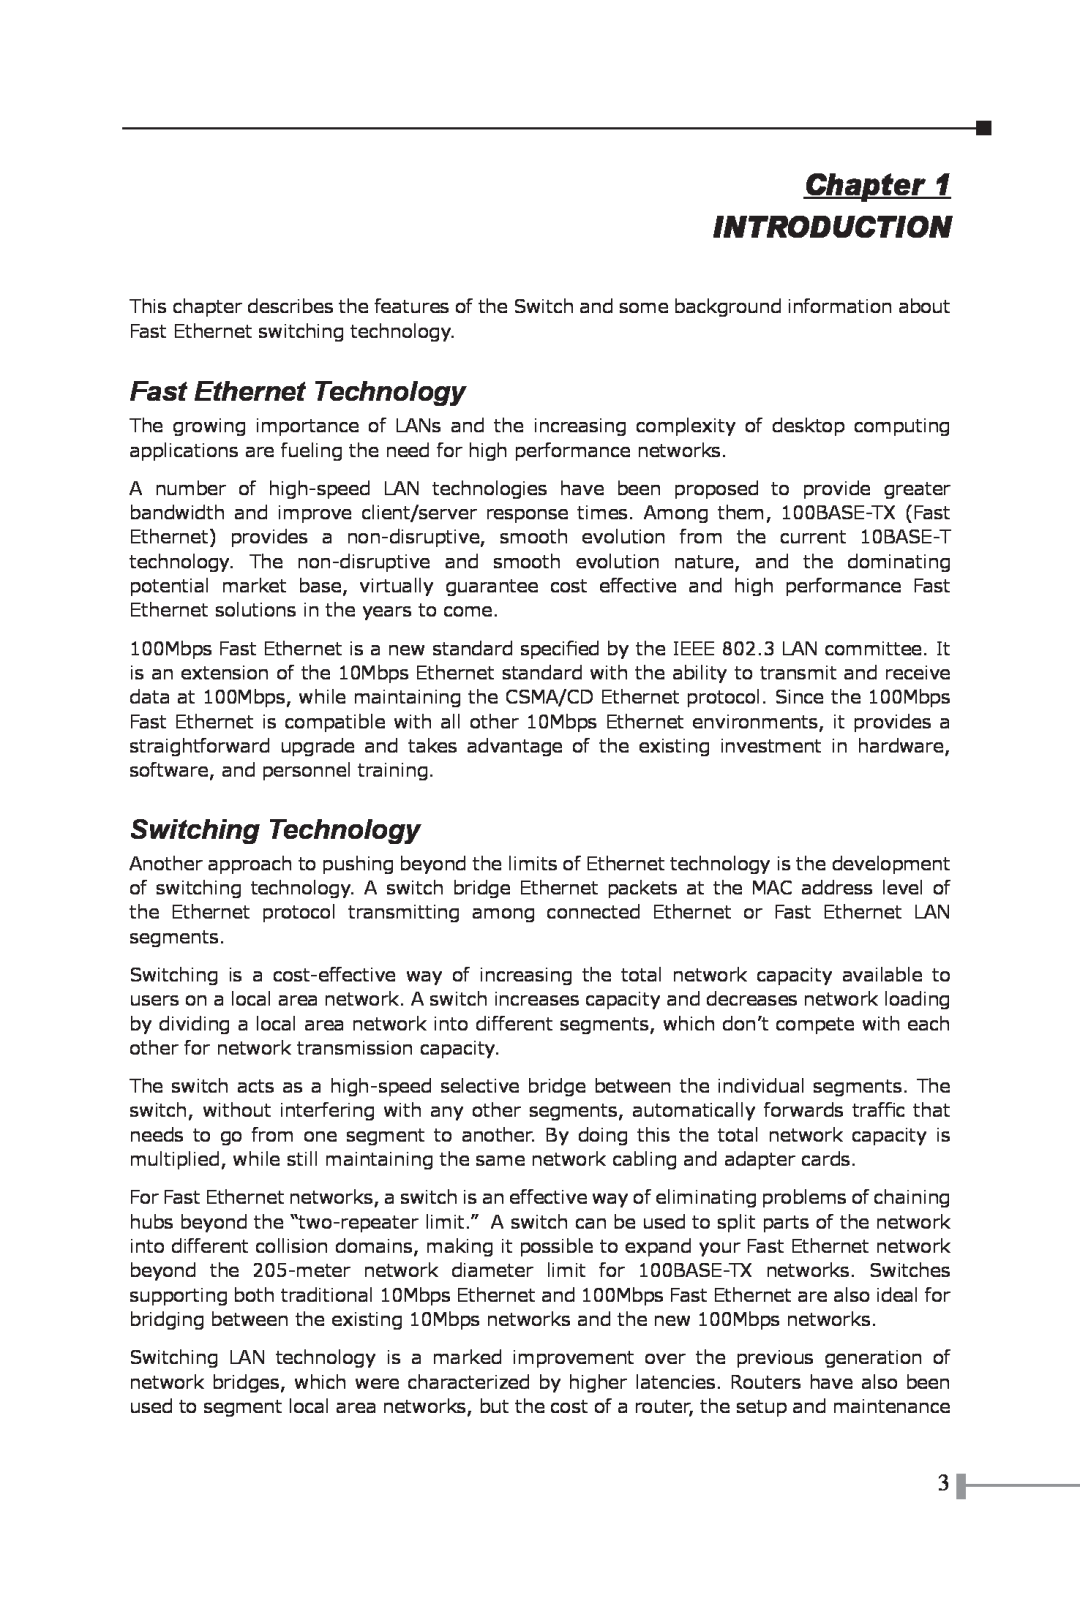 Planet Technology FSD-803, FSD-1603, FSD-503 manual Chapter INTRODUCTION, Fast Ethernet Technology, Switching Technology 